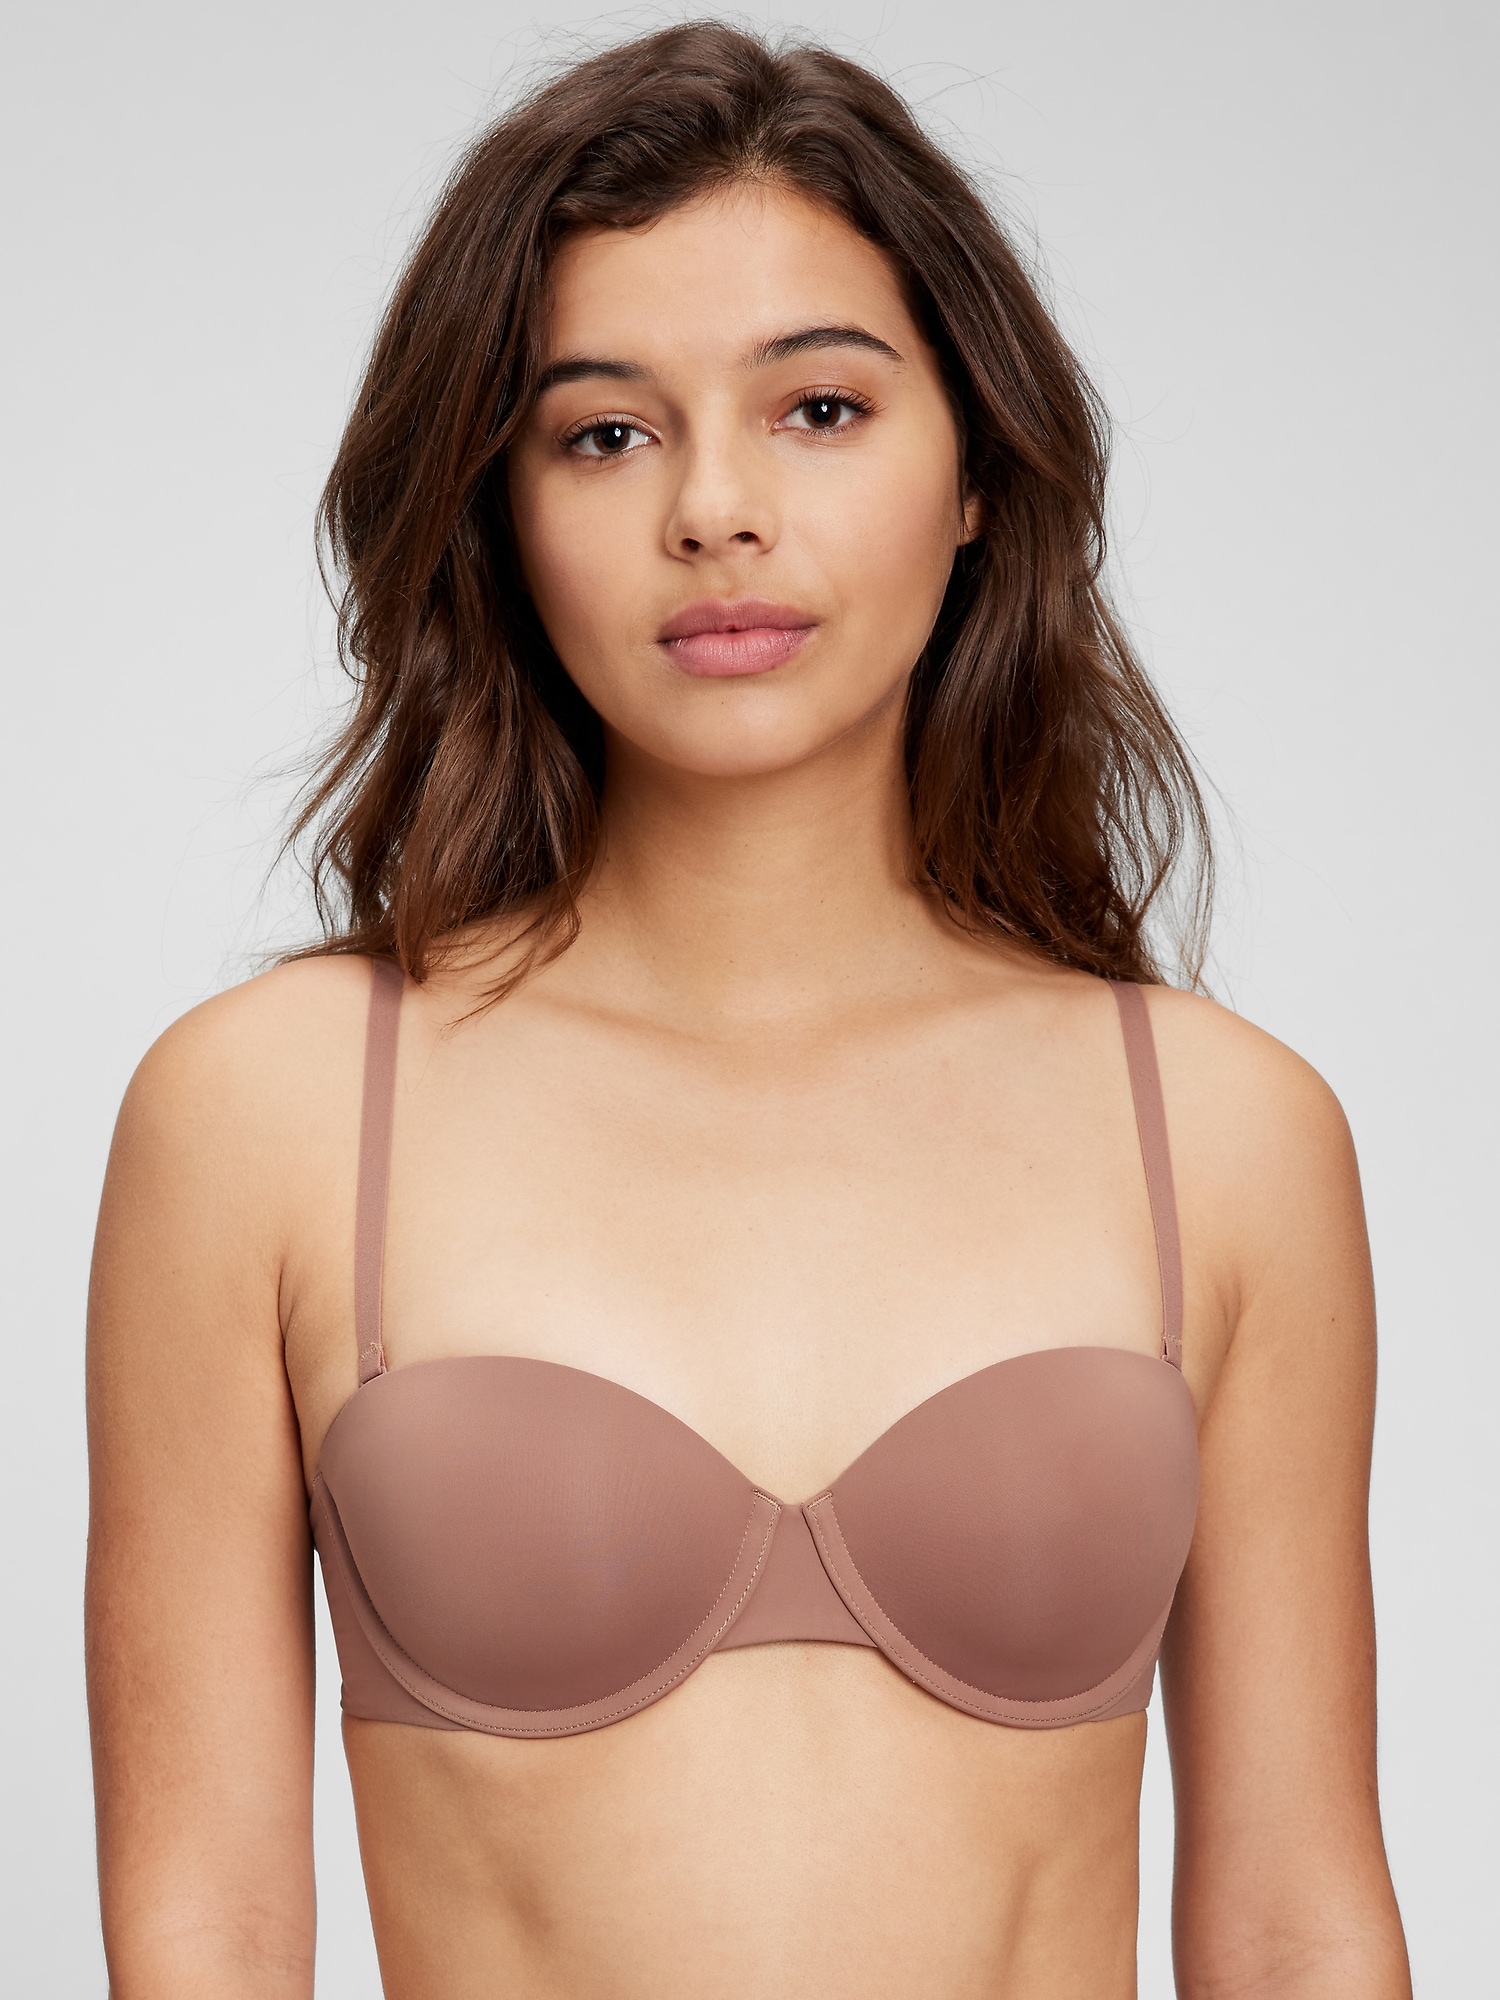 Gap Multiway T-shirt Bra In Mauvey Brown